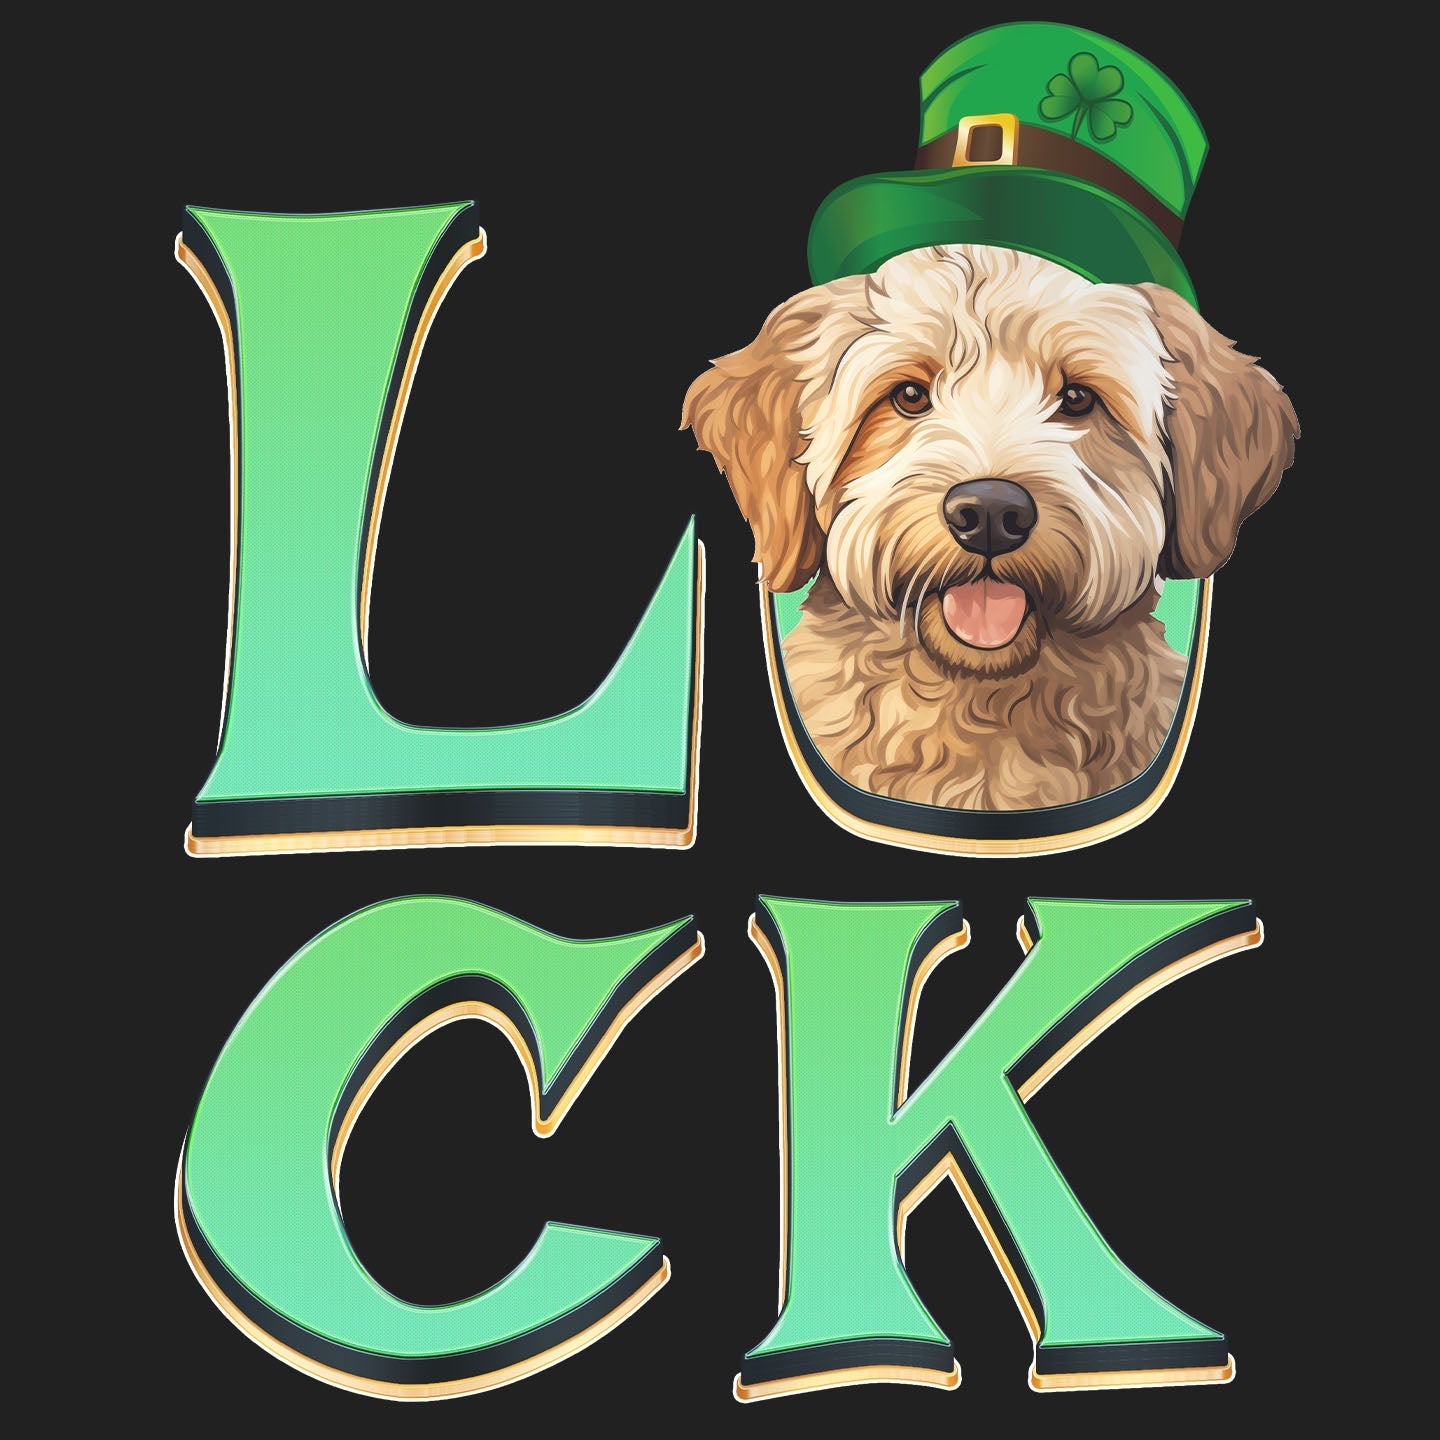 Big LUCK St. Patrick's Day Labradoodle (Yellow) - Women's Fitted T-Shirt